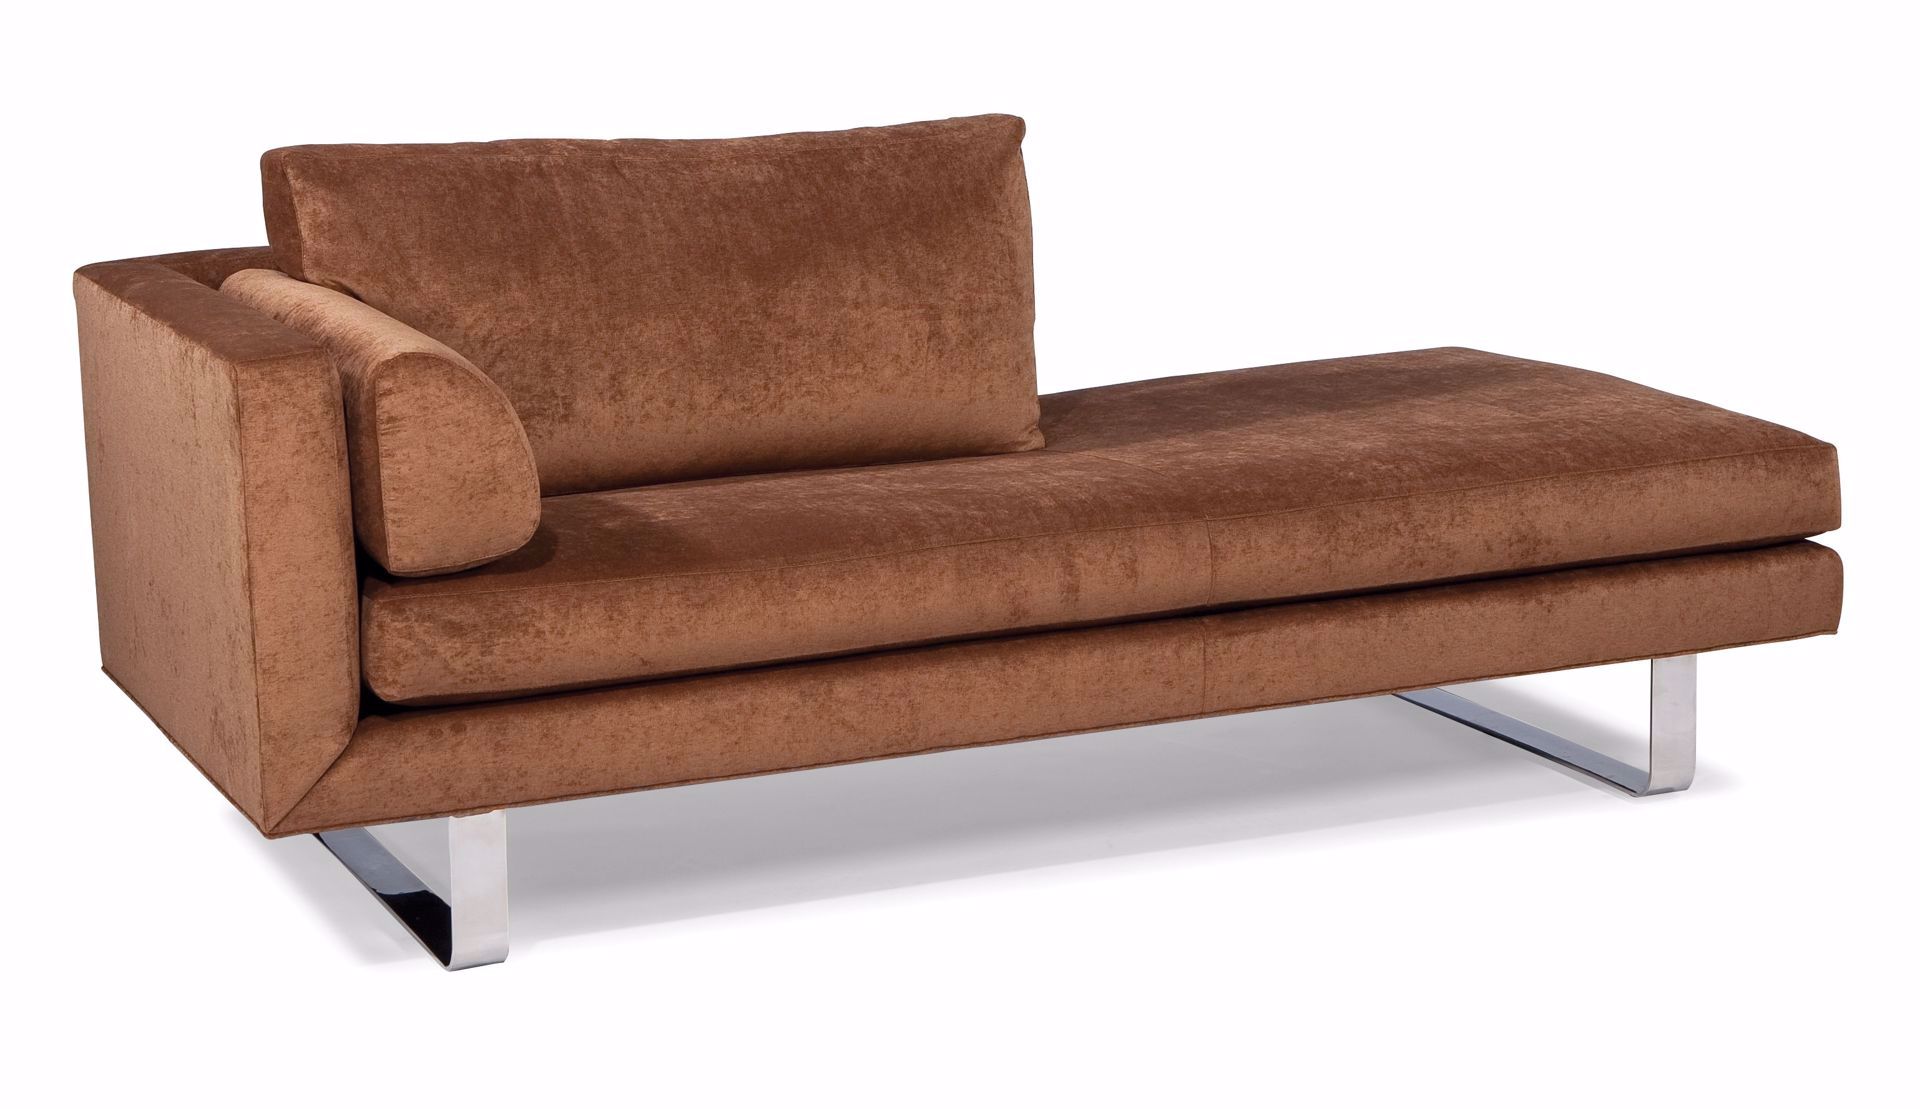 K5828-PSS R/LACH BRODY 1-ARM CHAISE